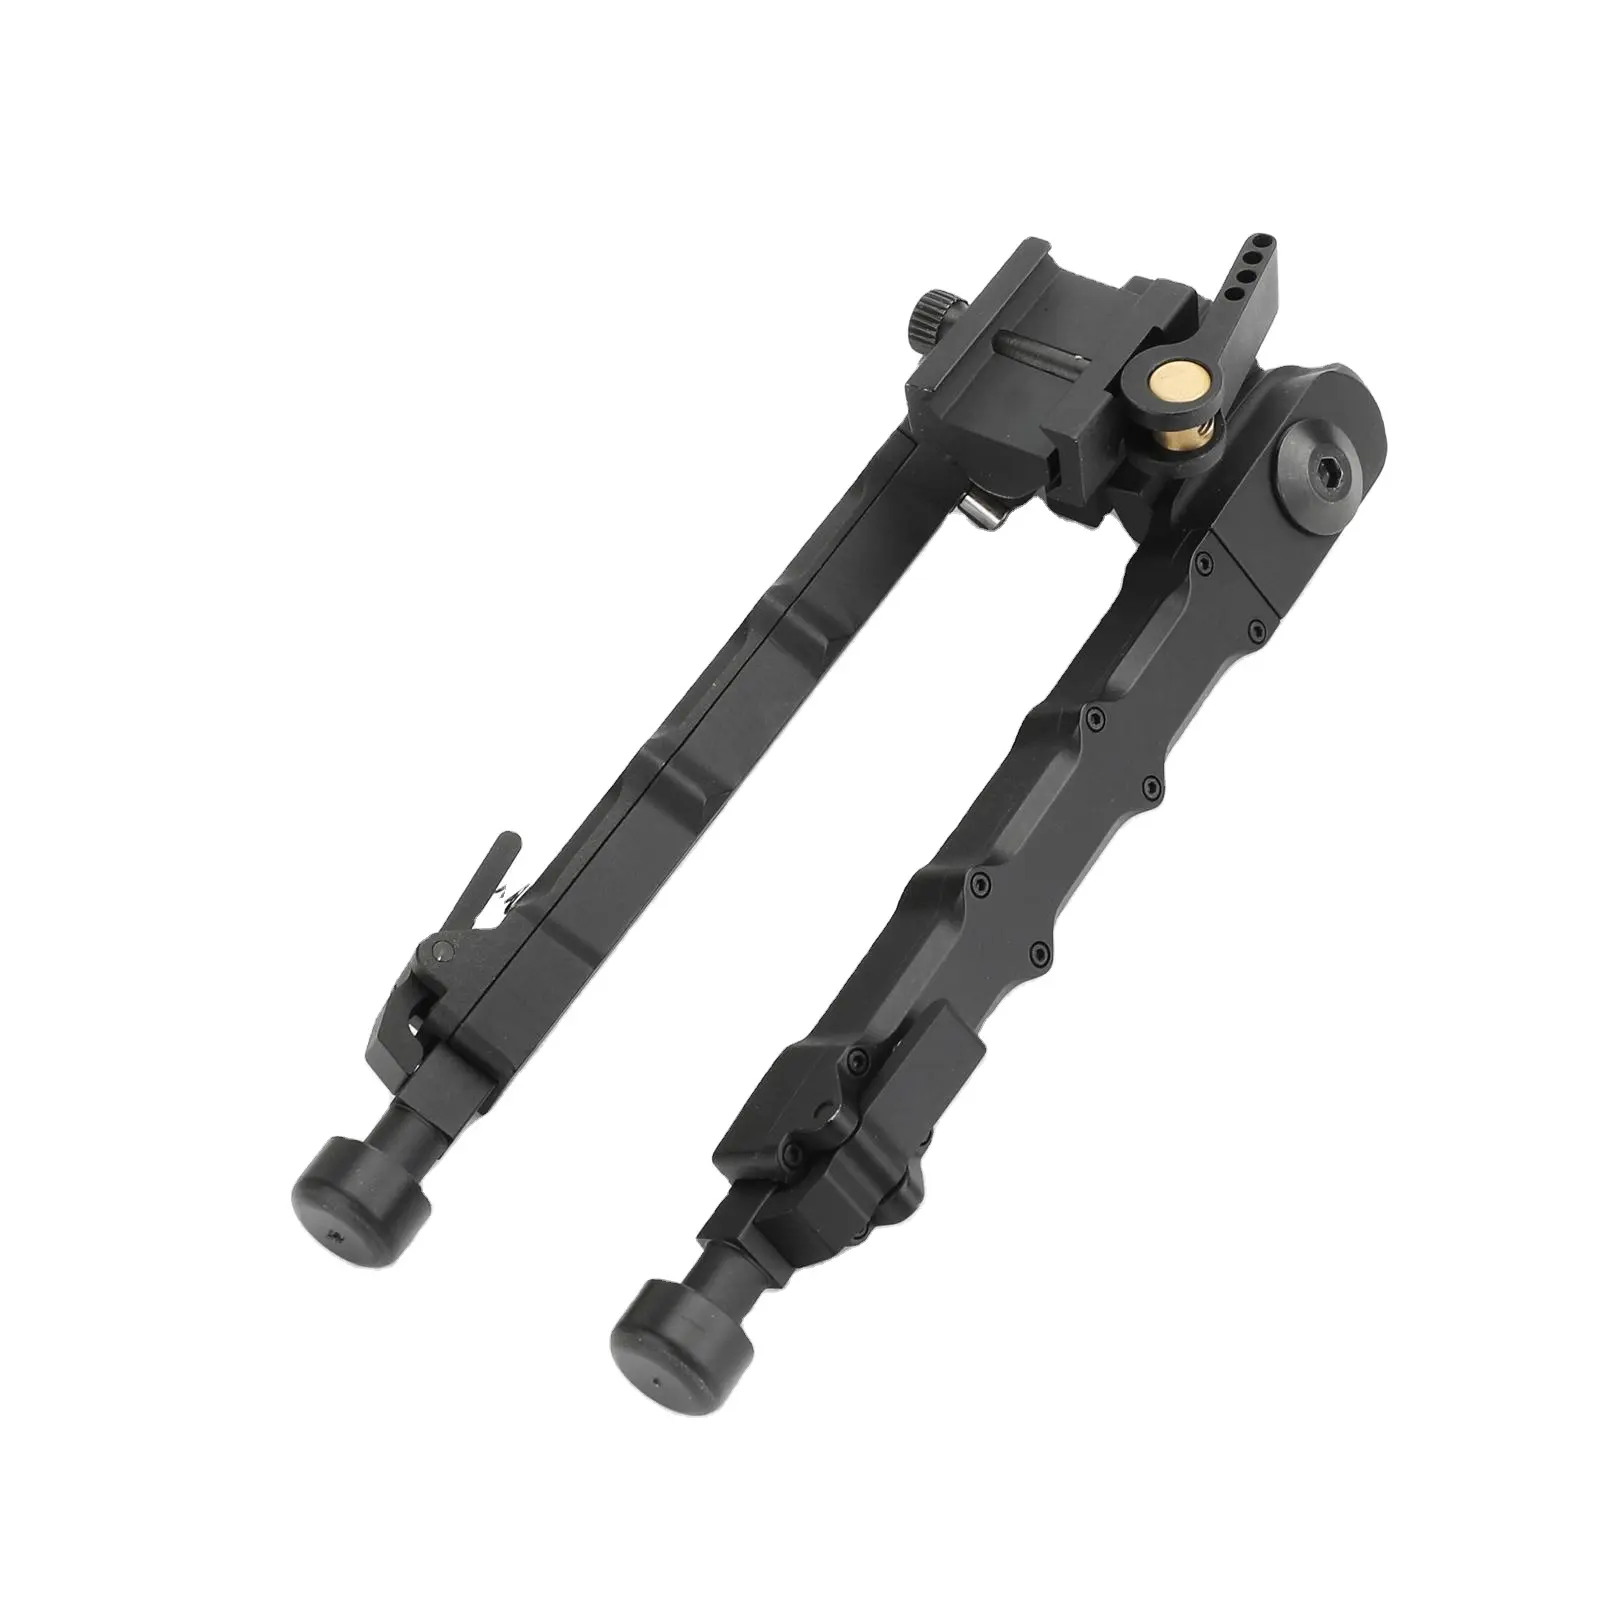 Outdoor adjustable V9 tactical tripod with 20mm Mount